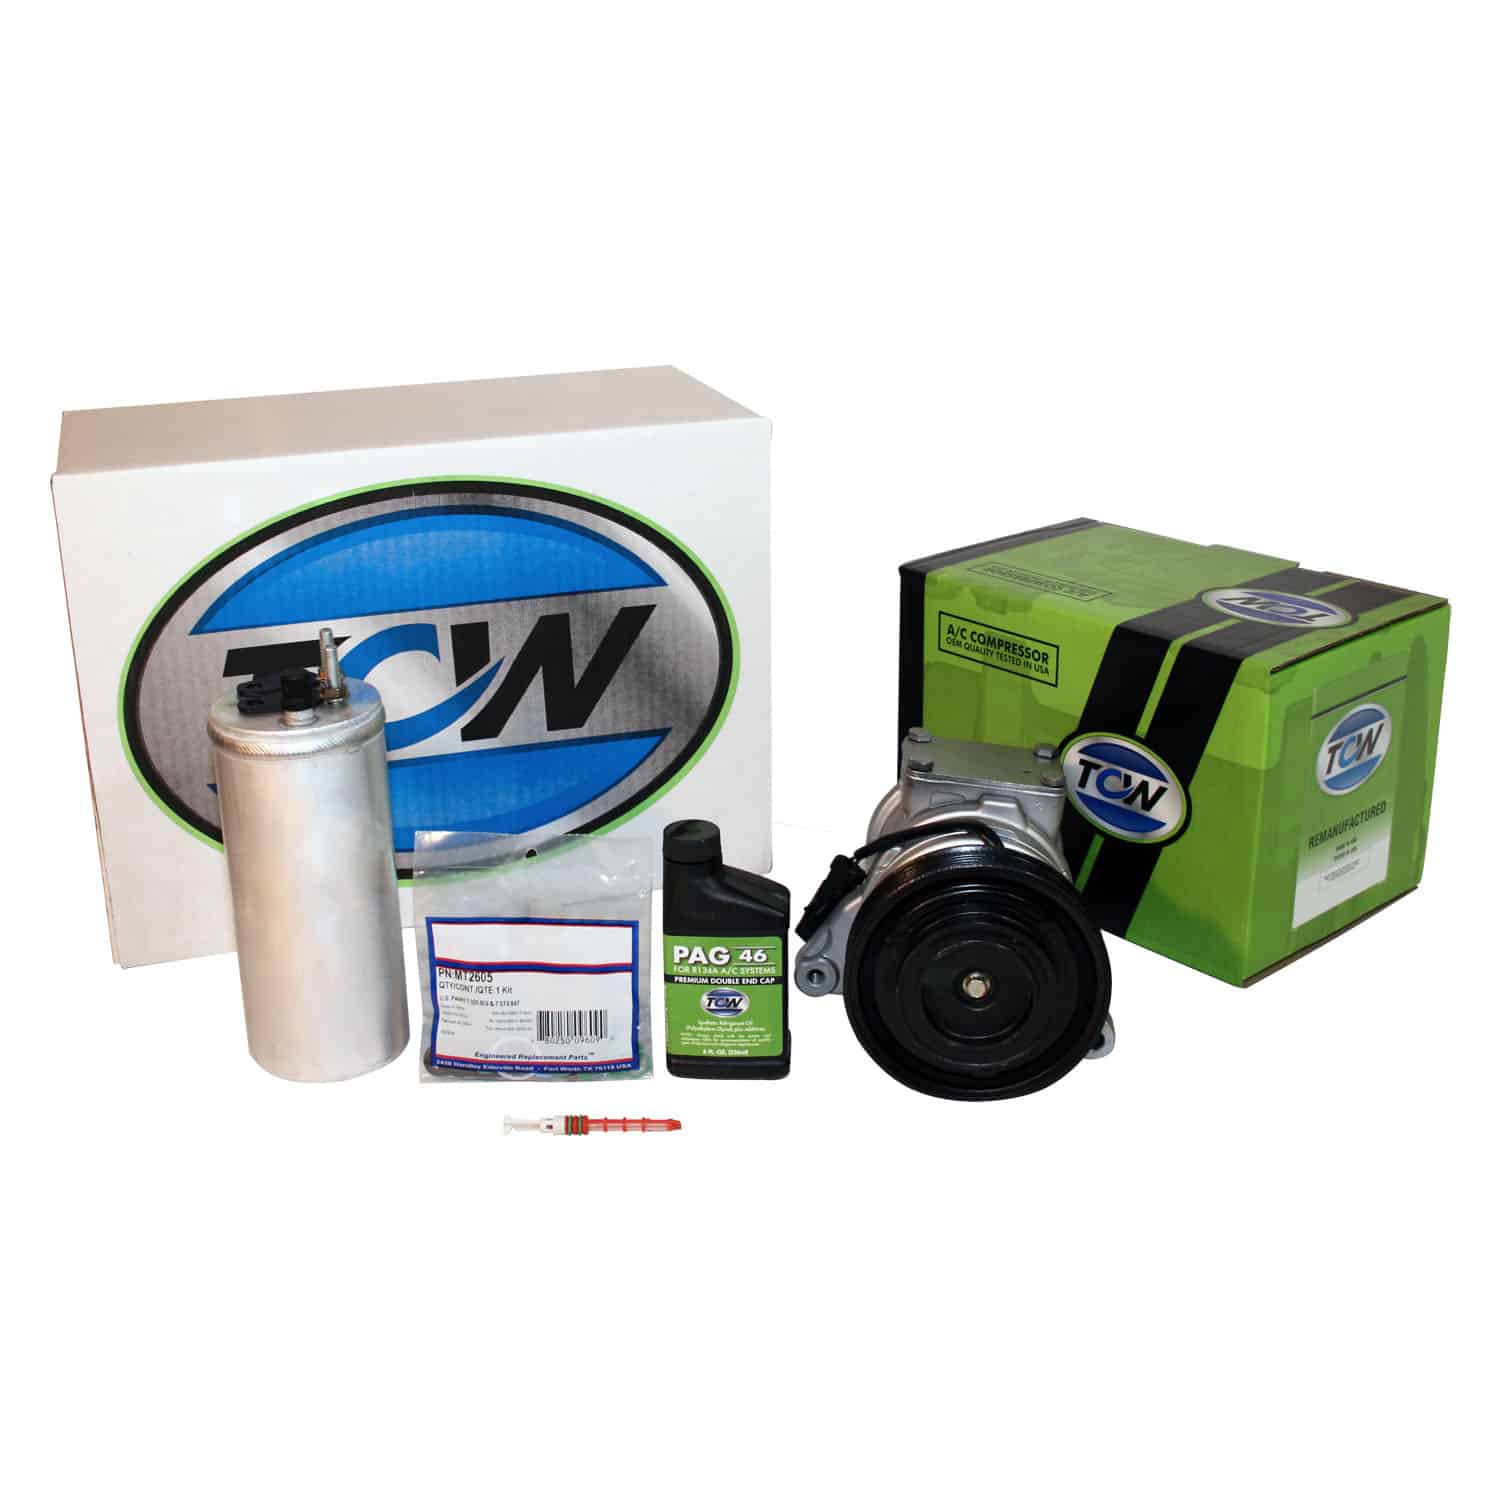 TCW Vehicle A/C Kit K1000212R Remanufactured Product Image field_60b6a13a6e67c